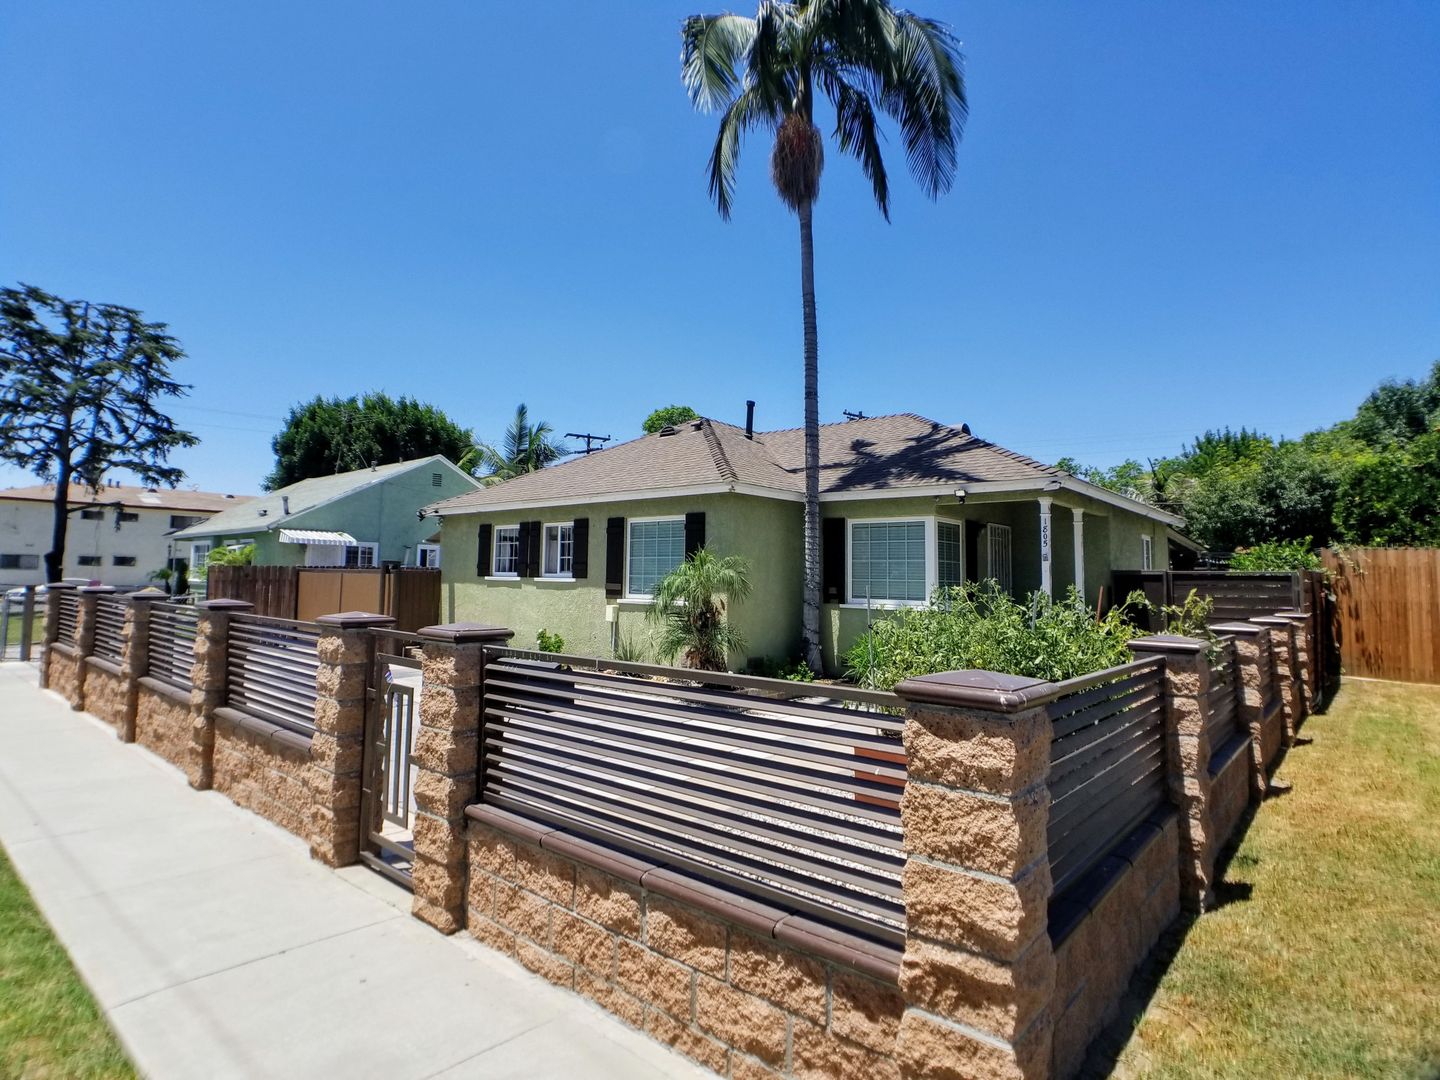 Property Listing for 07/21/2020